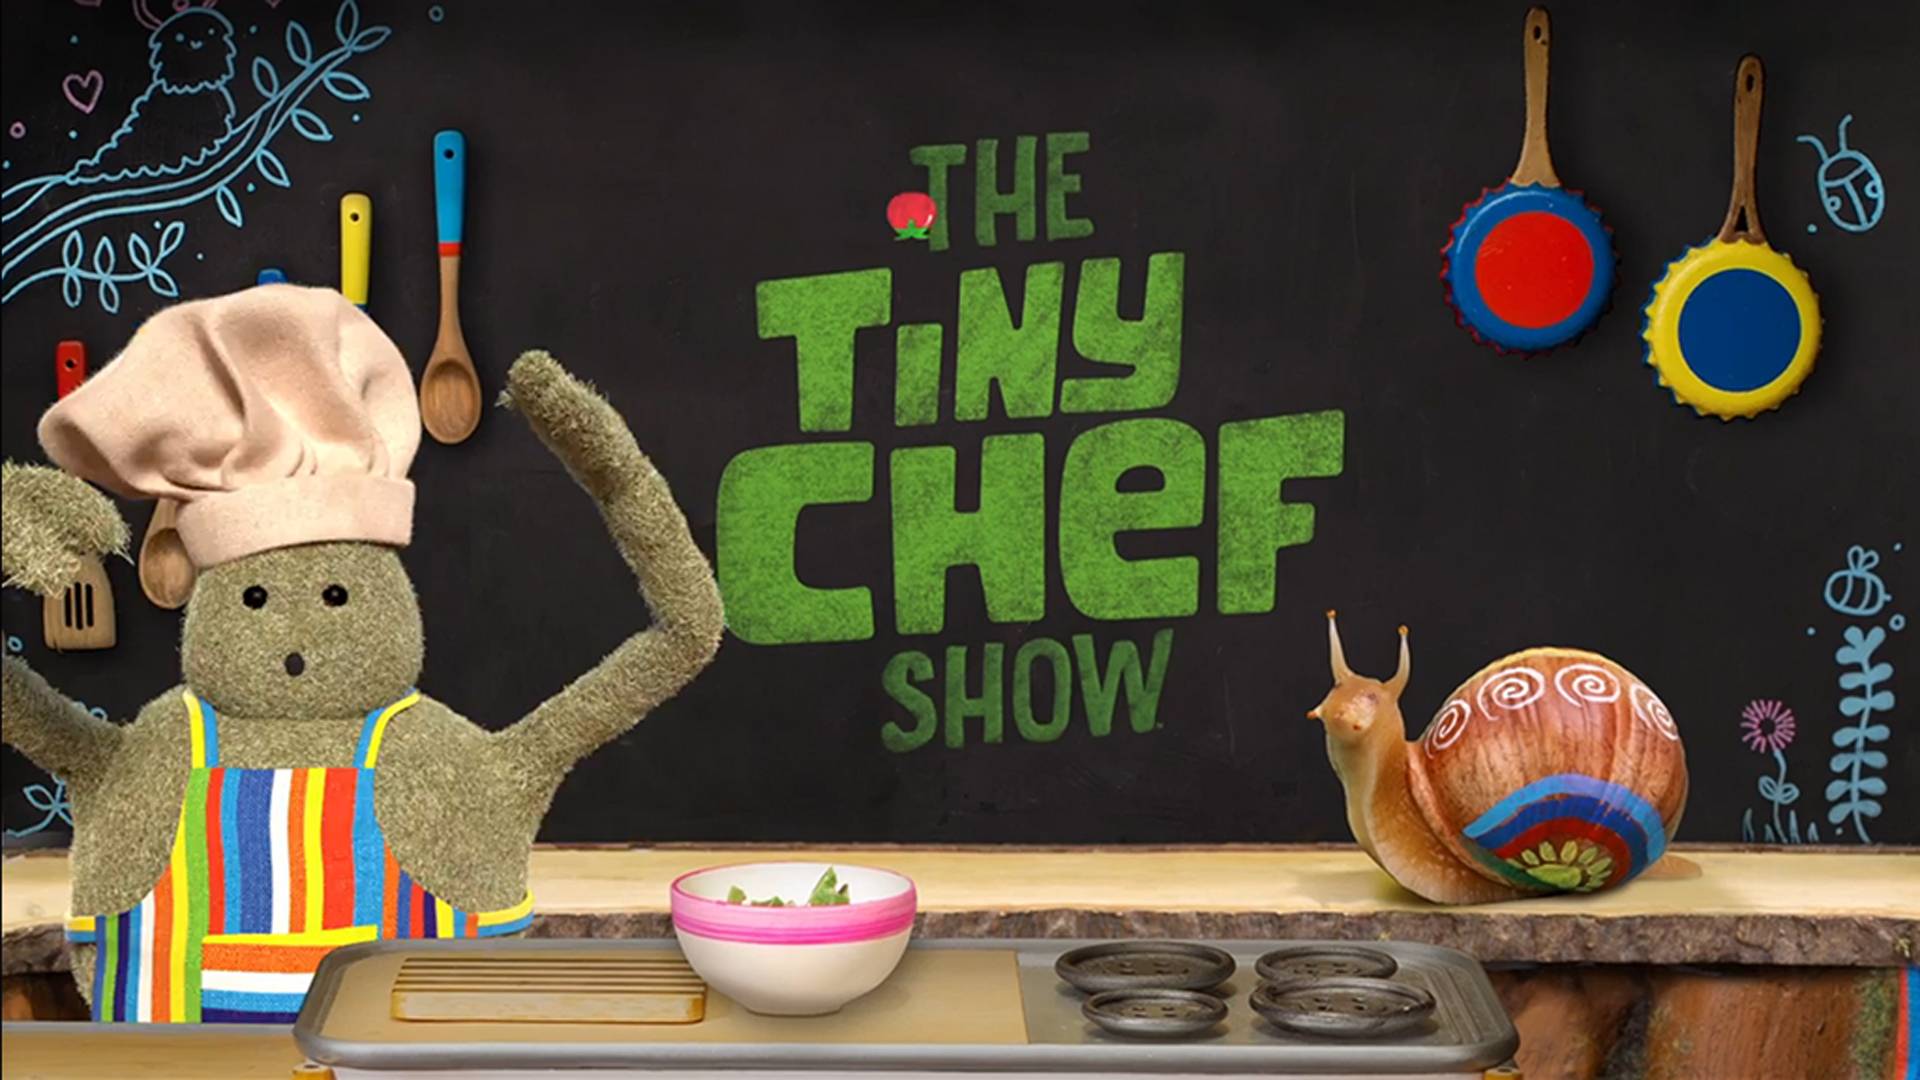 The Tiny Chef Show Teaser Trailer - The Tiny Chef Show (Video Clip ...